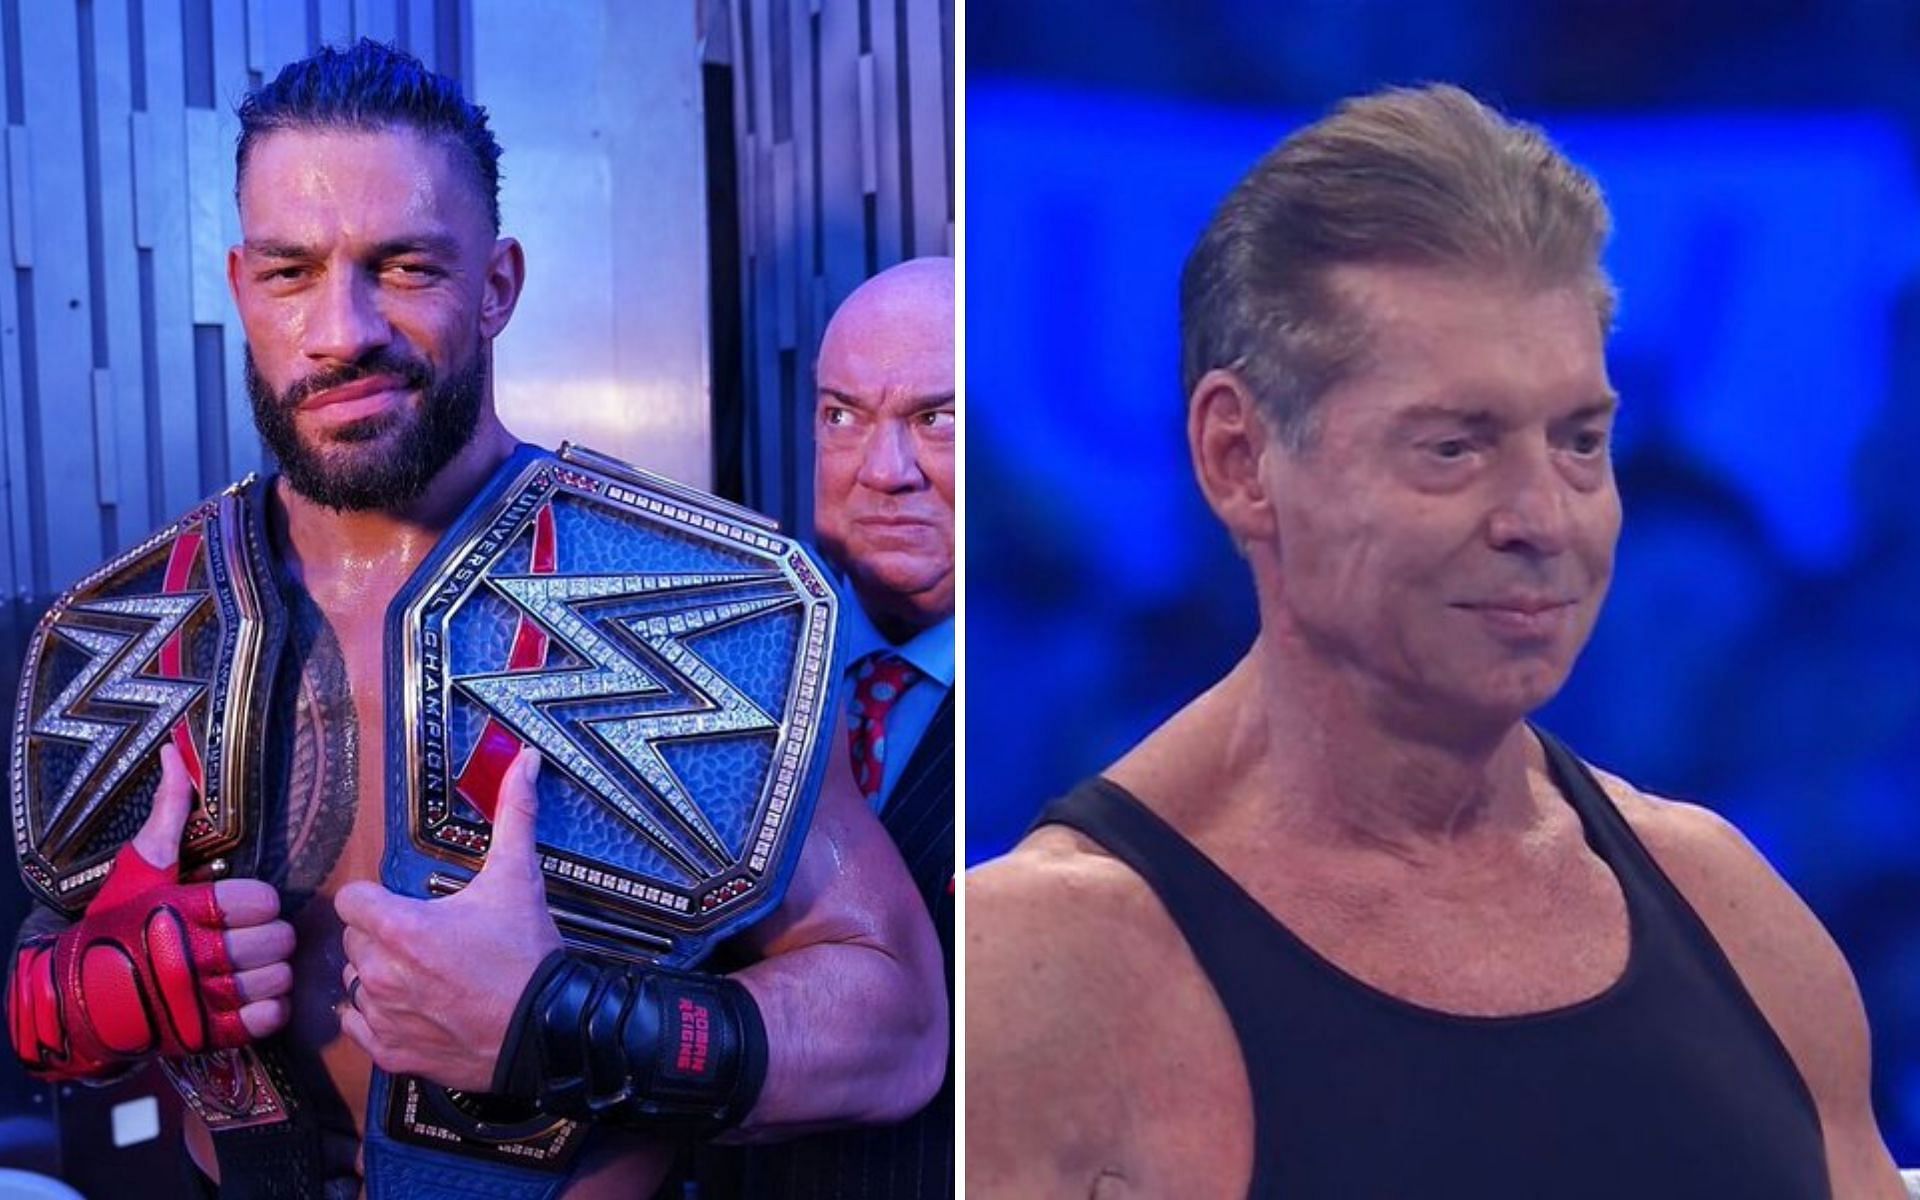 The undisputed World Champion (left); Vince McMahon wrestled in the co-main event (right)